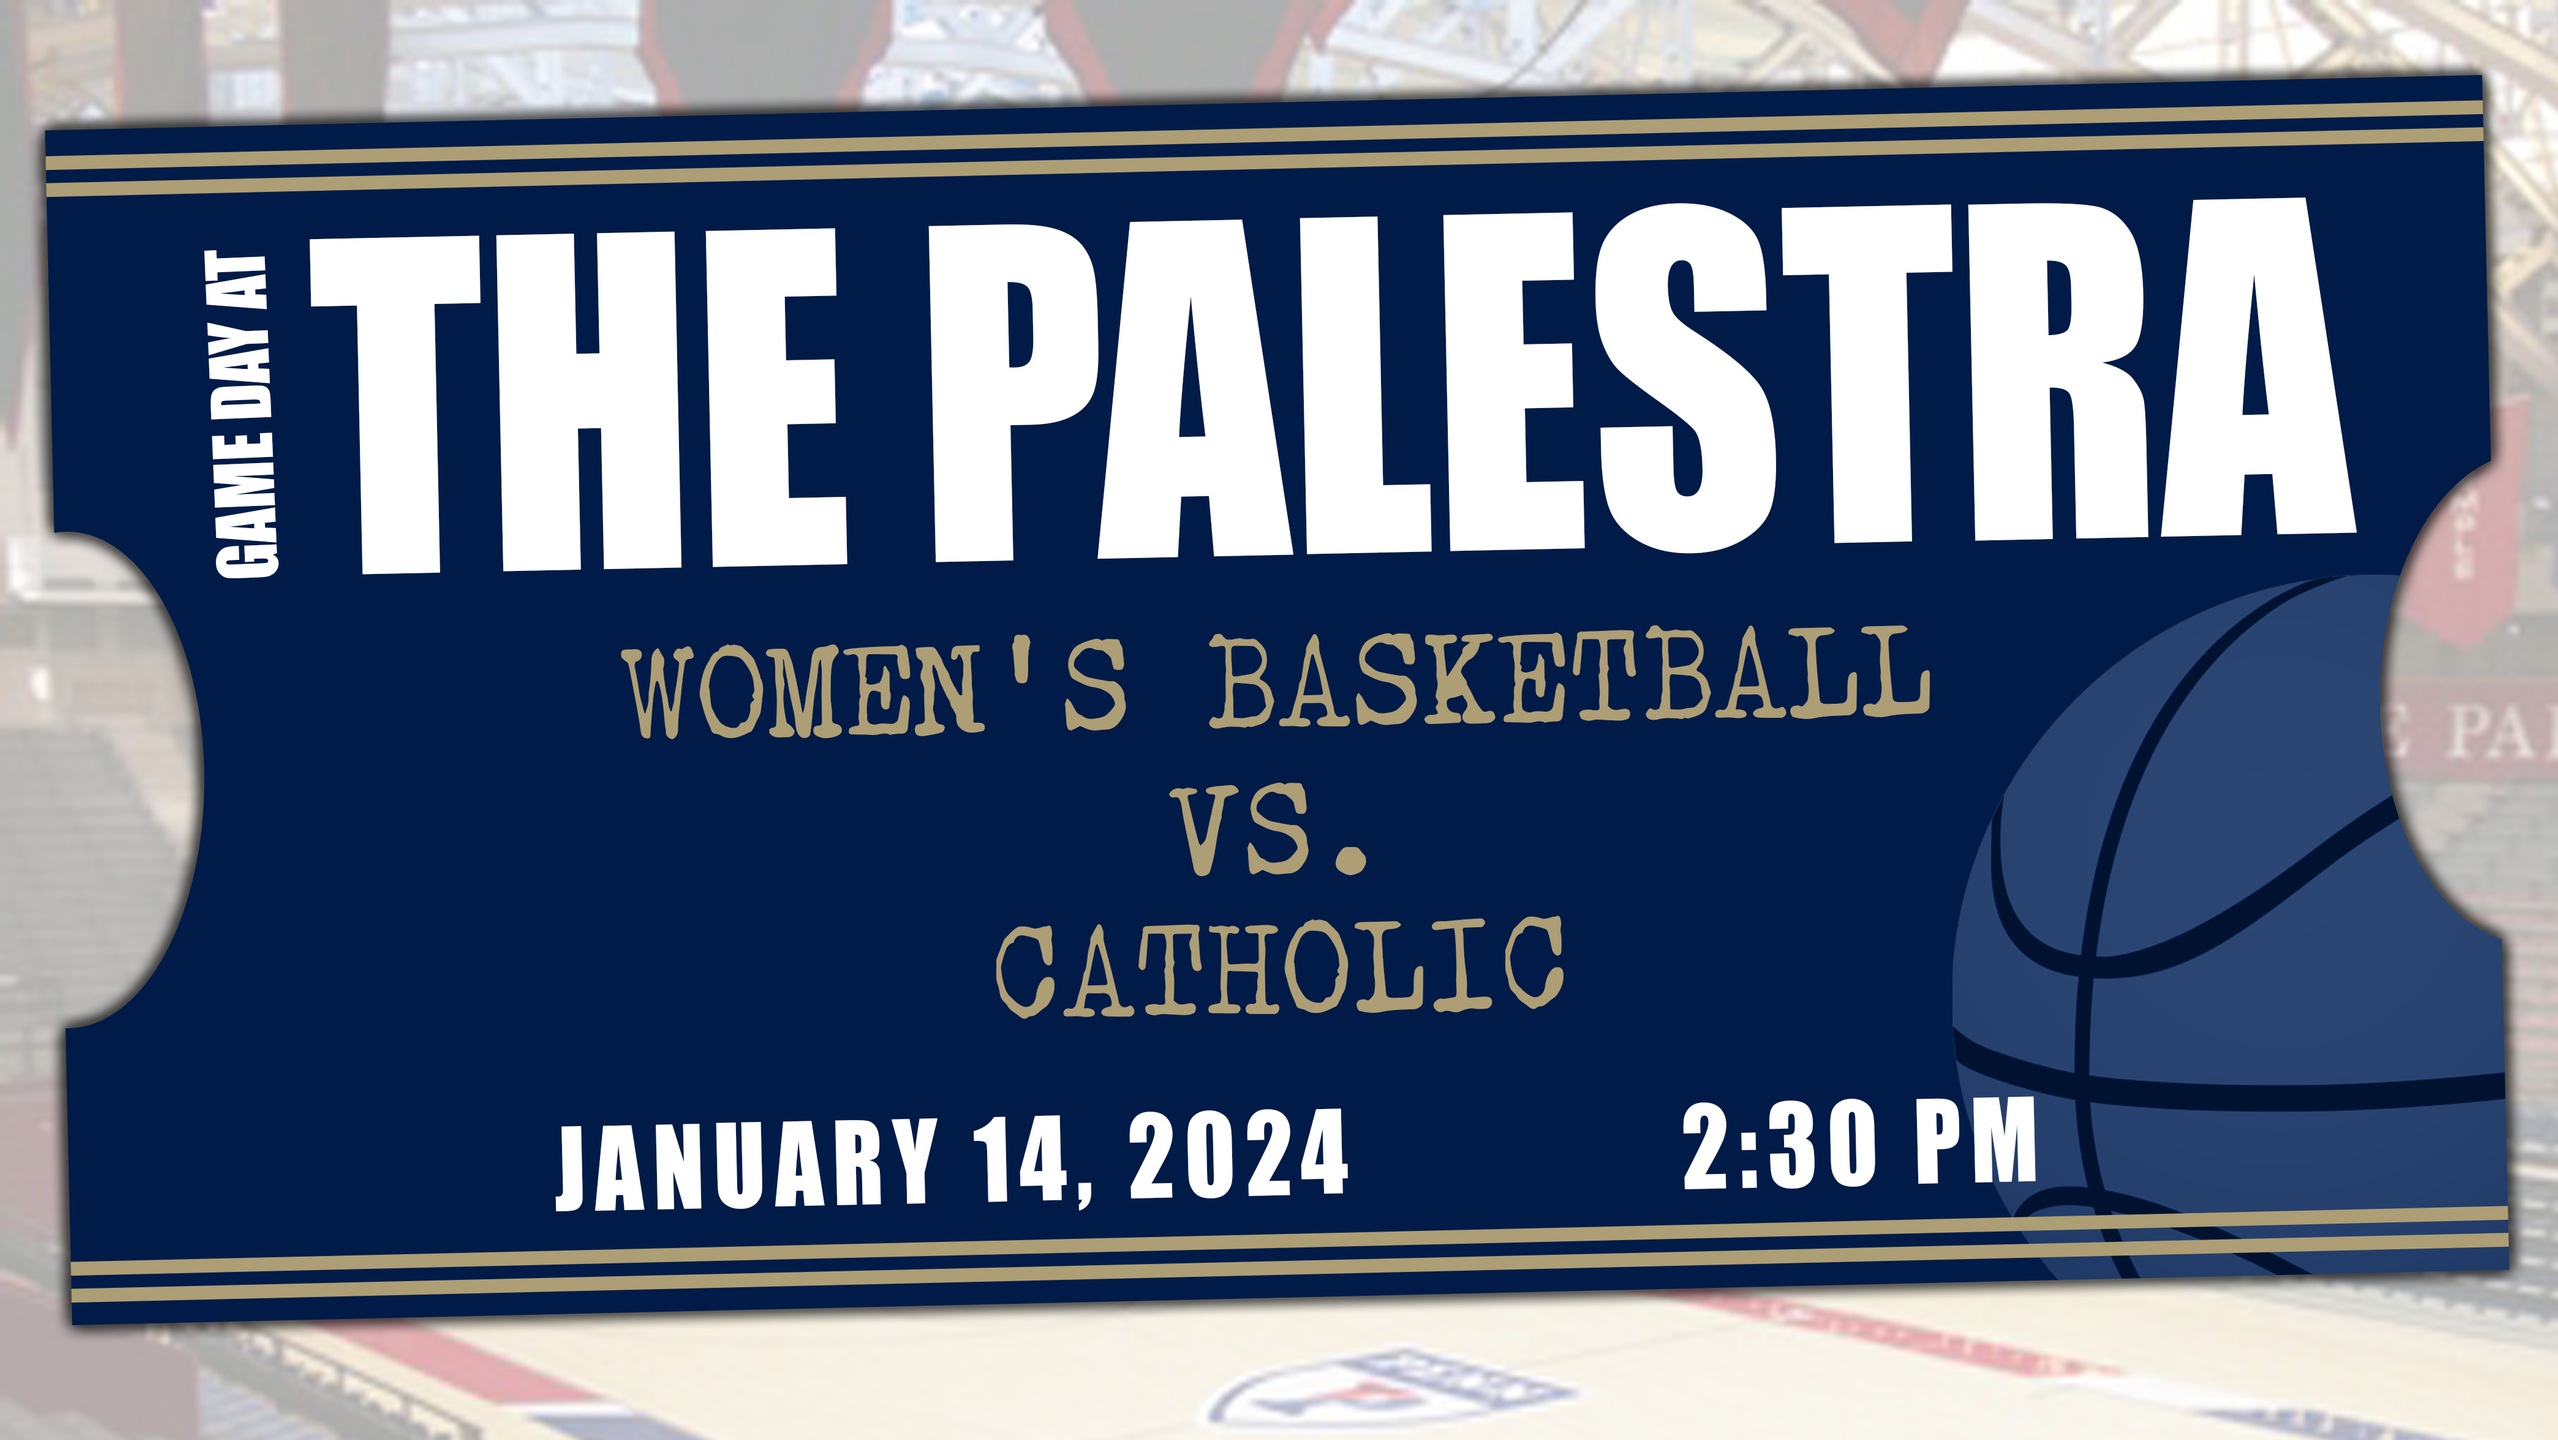 Women's Basketball Slated for Game at Historic Palestra